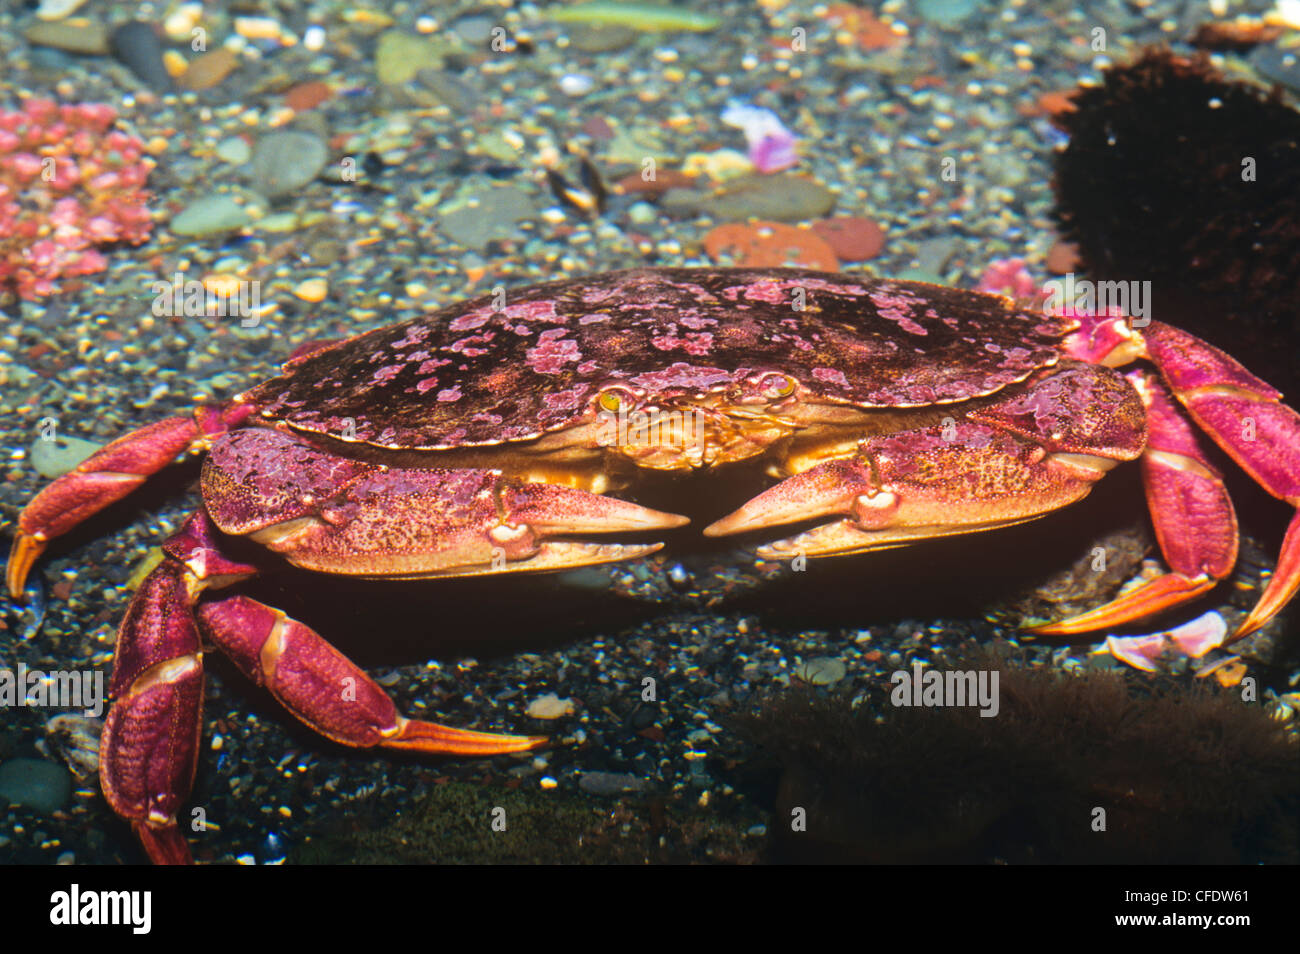 (Cancer productus) Red Crab Stock Photo